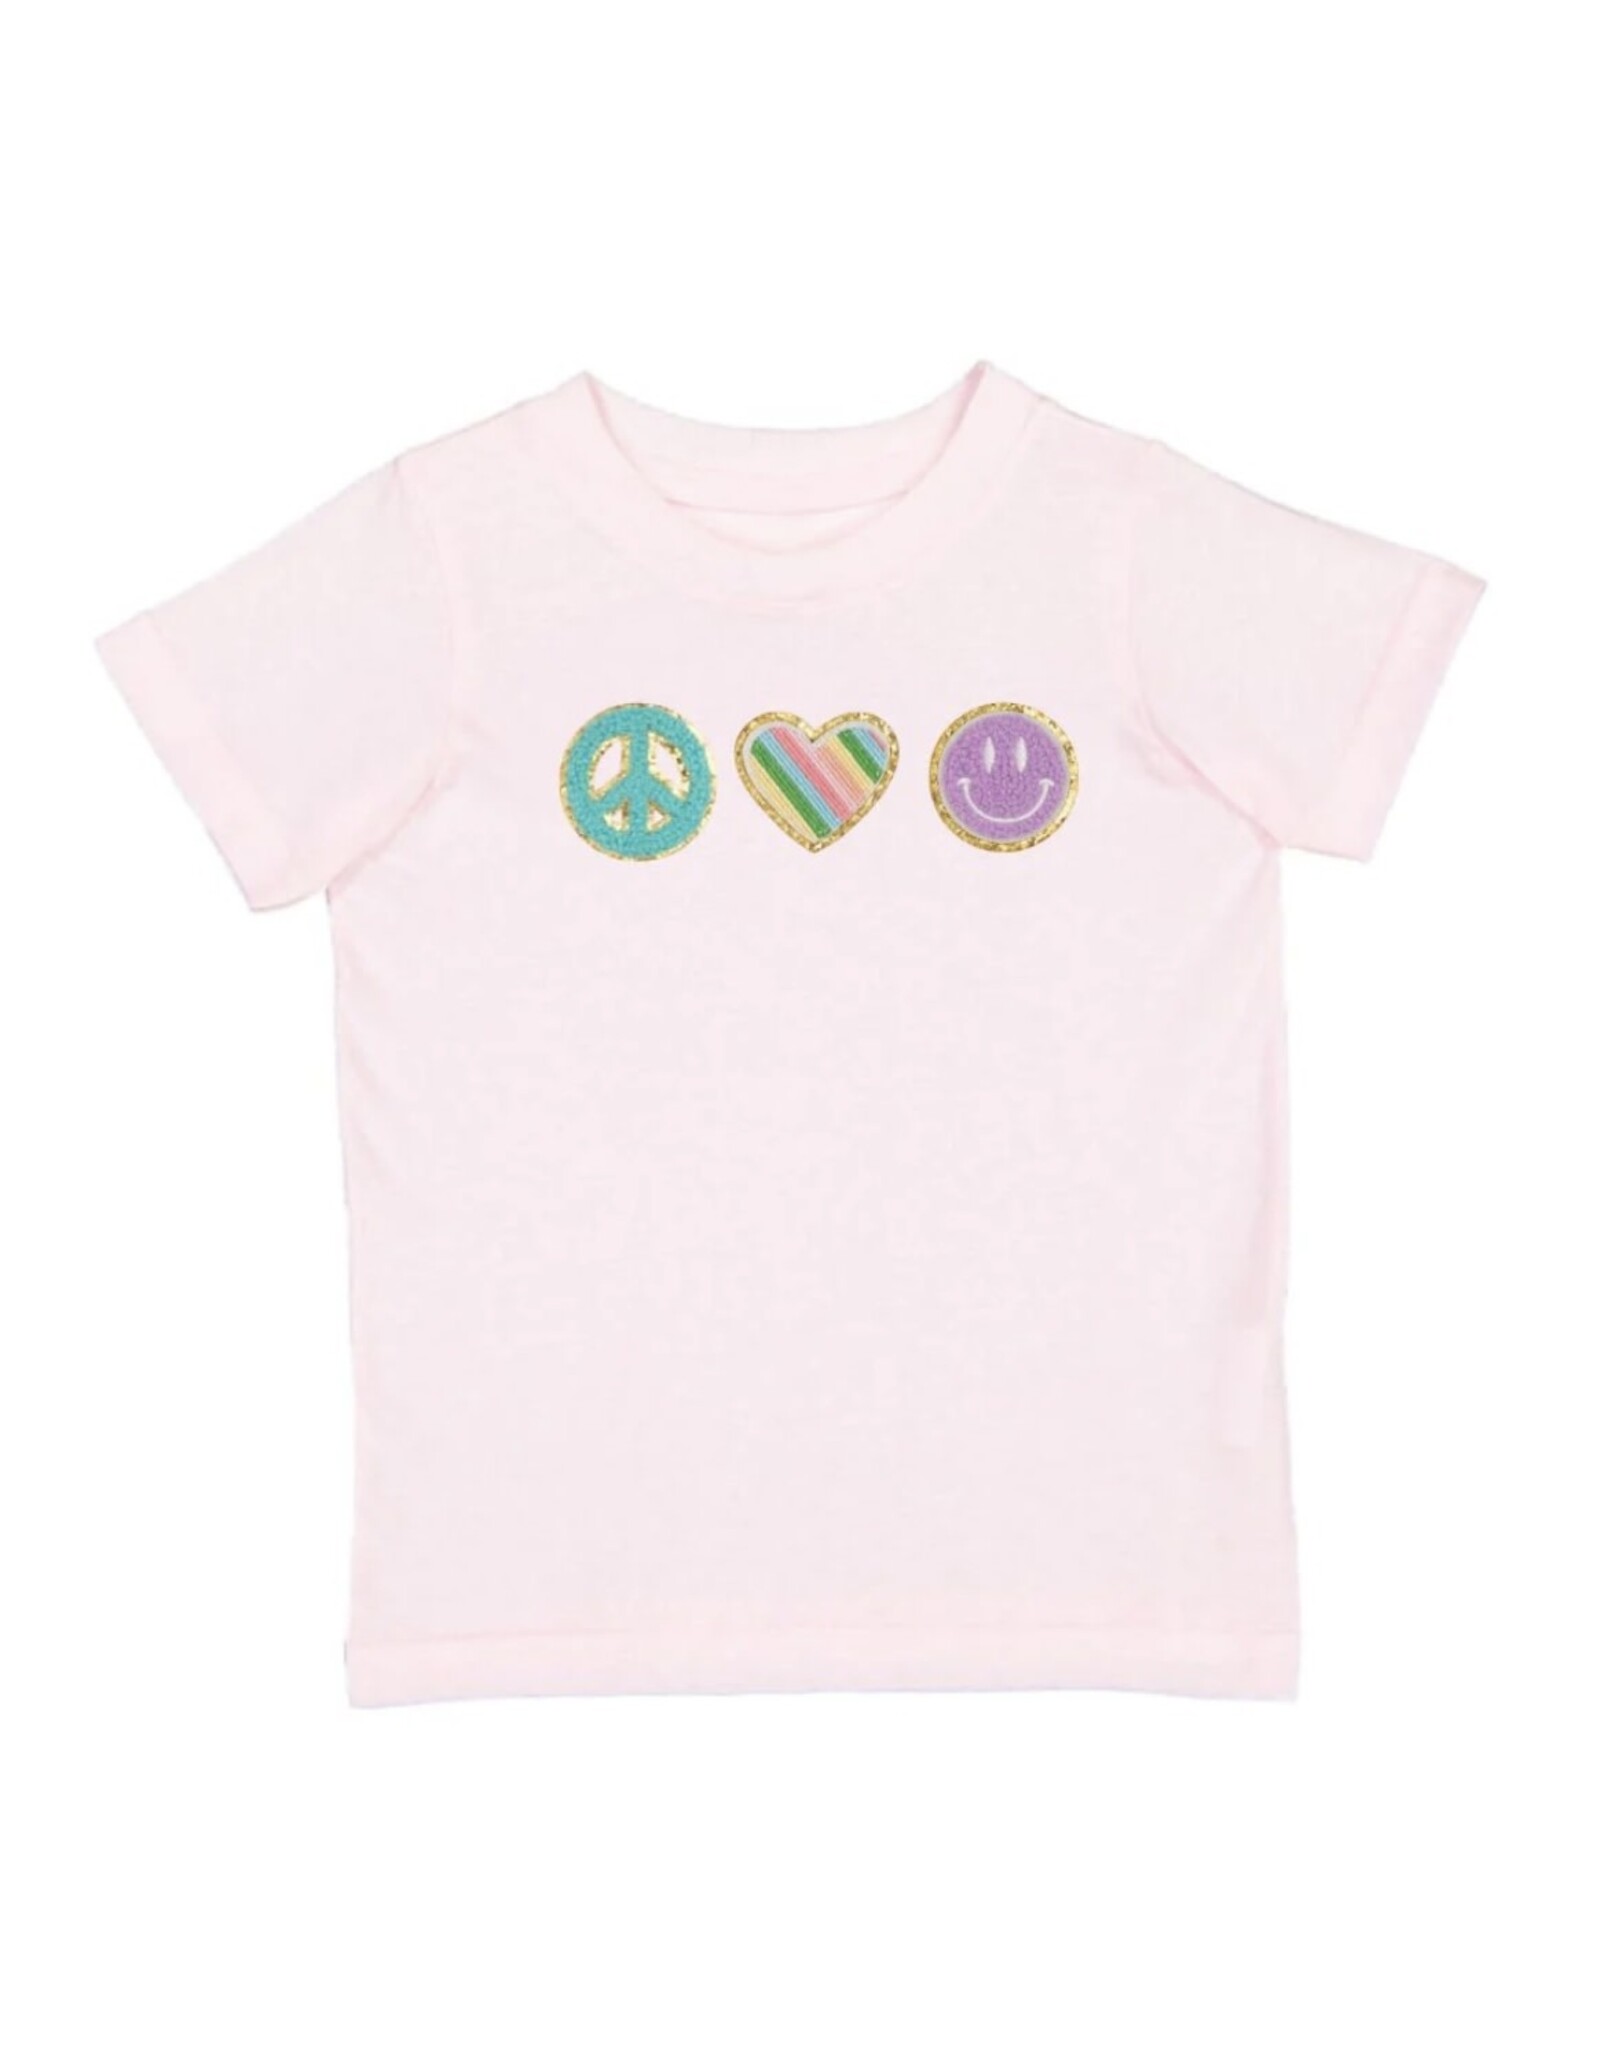 Sweet Wink- Peace, Love, Smile Patch S/S Shirt